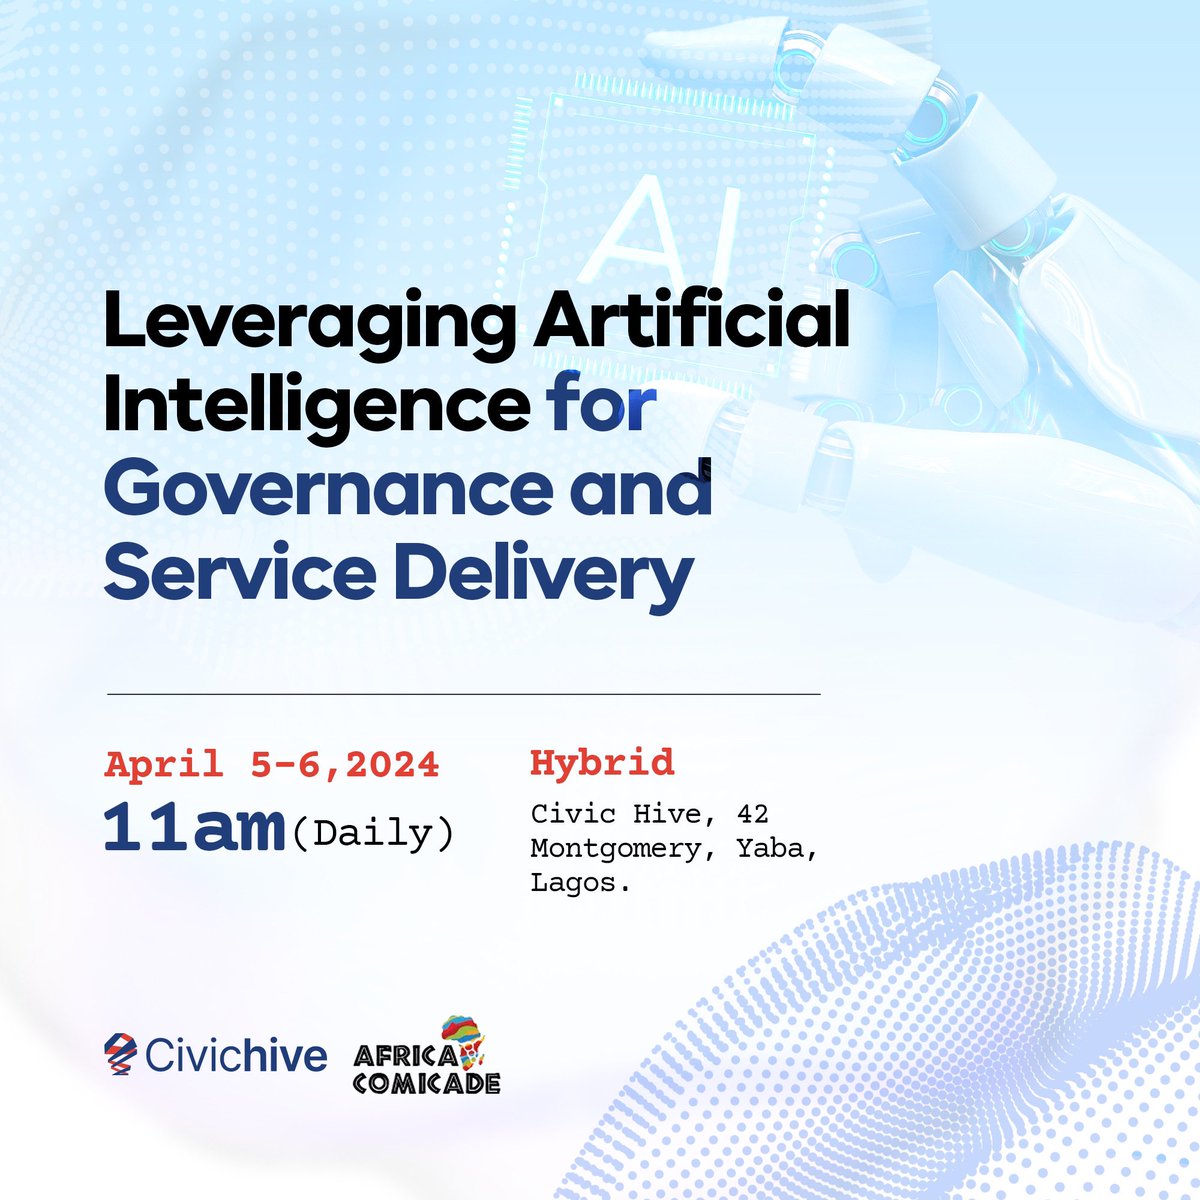 Have you registered to be a part of our ground-breaking workshop on Leveraging Artificial Intelligence for Governance and Service Delivery? What are you waiting for? Register now to secure your spot! tinyurl.com/CivicHiveworks…